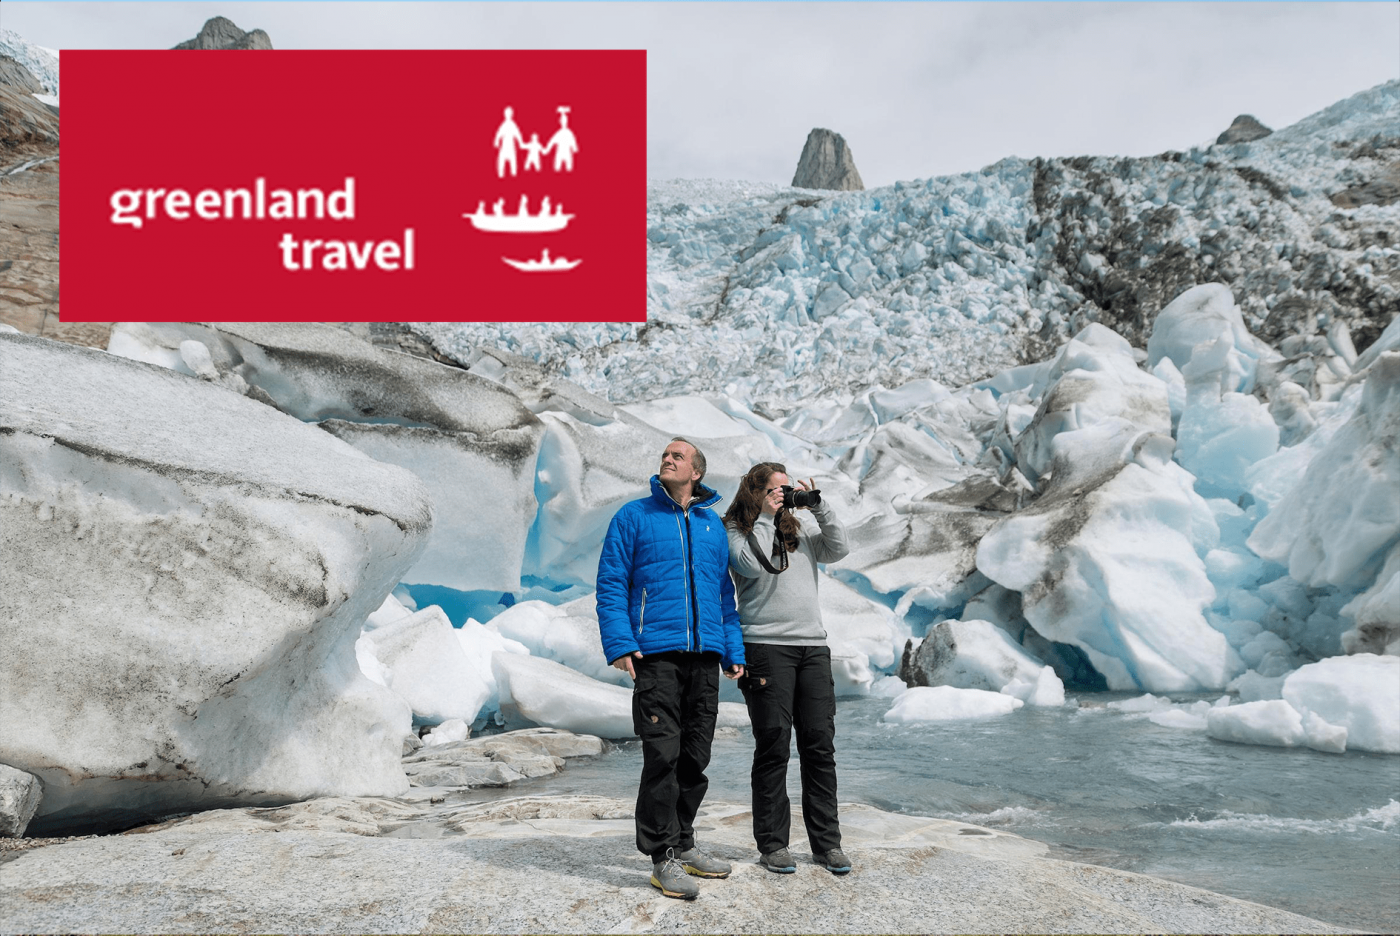 Greenland Travel: Zoom in on Ice and Snow